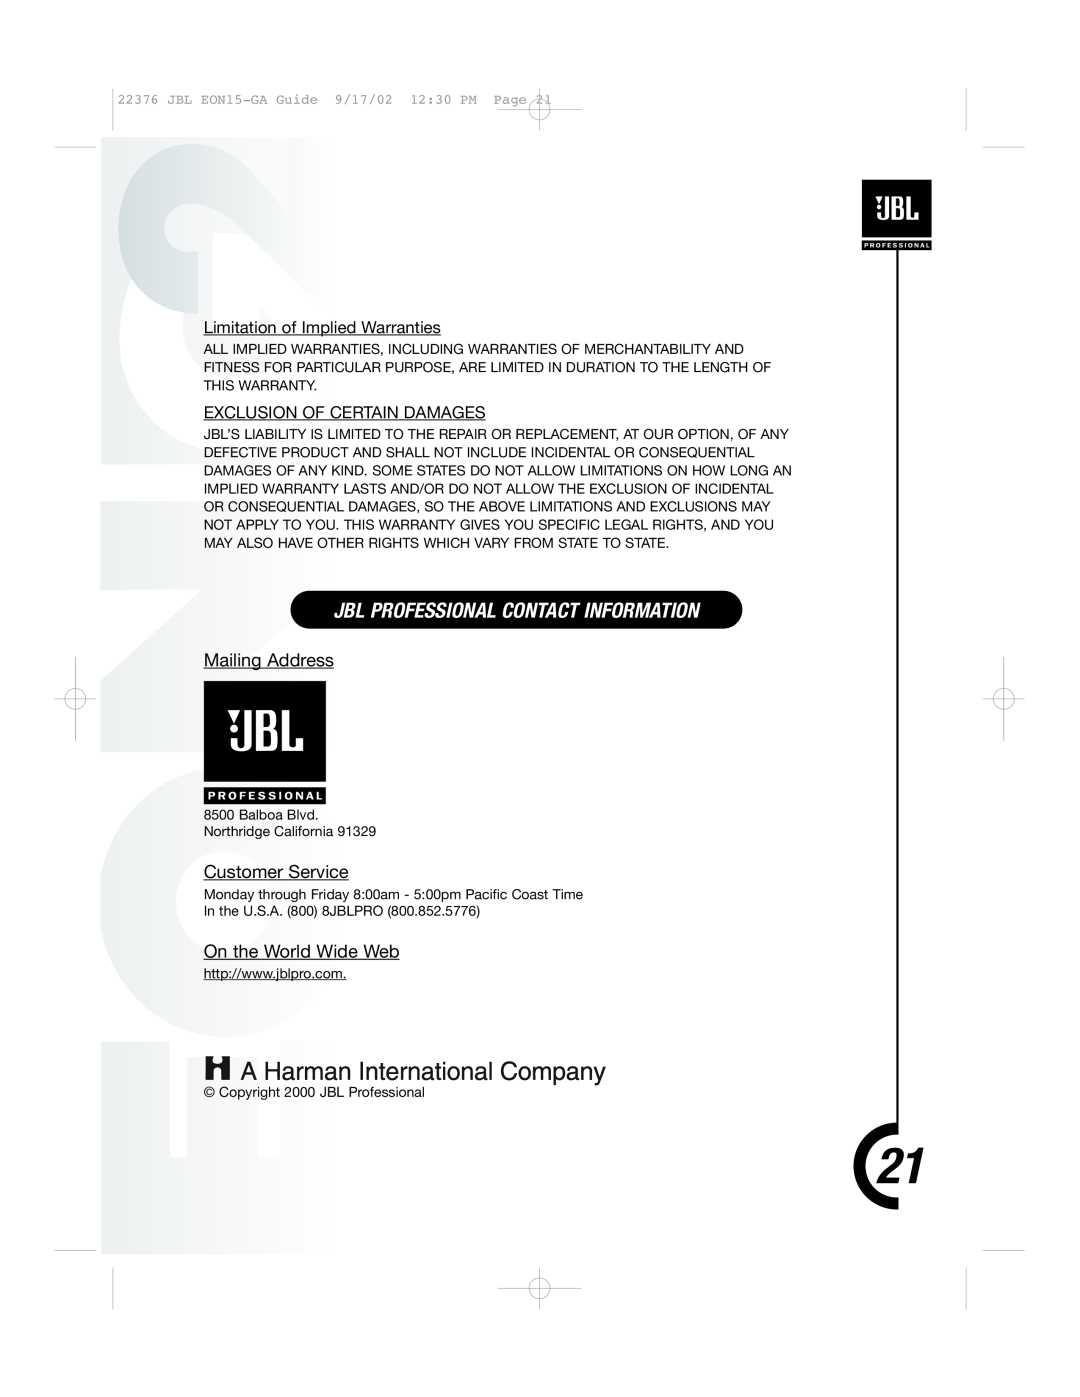 JBL EON15 manual Jbl Professional Contact Information, Limitation of Implied Warranties, Exclusion Of Certain Damages 